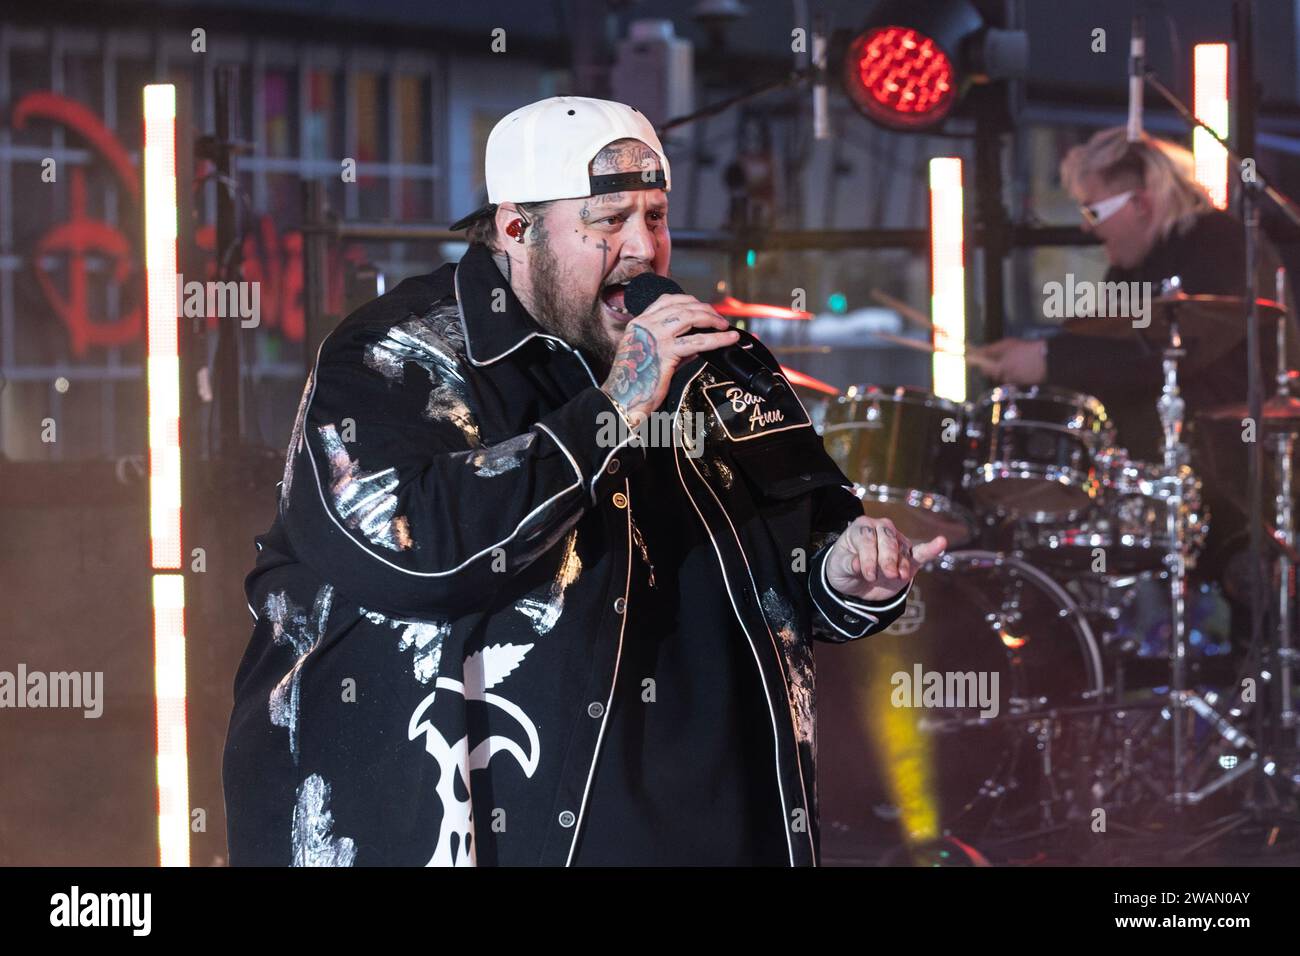 Jelly Roll performs on stage during 2024 New Year's celebration on ...